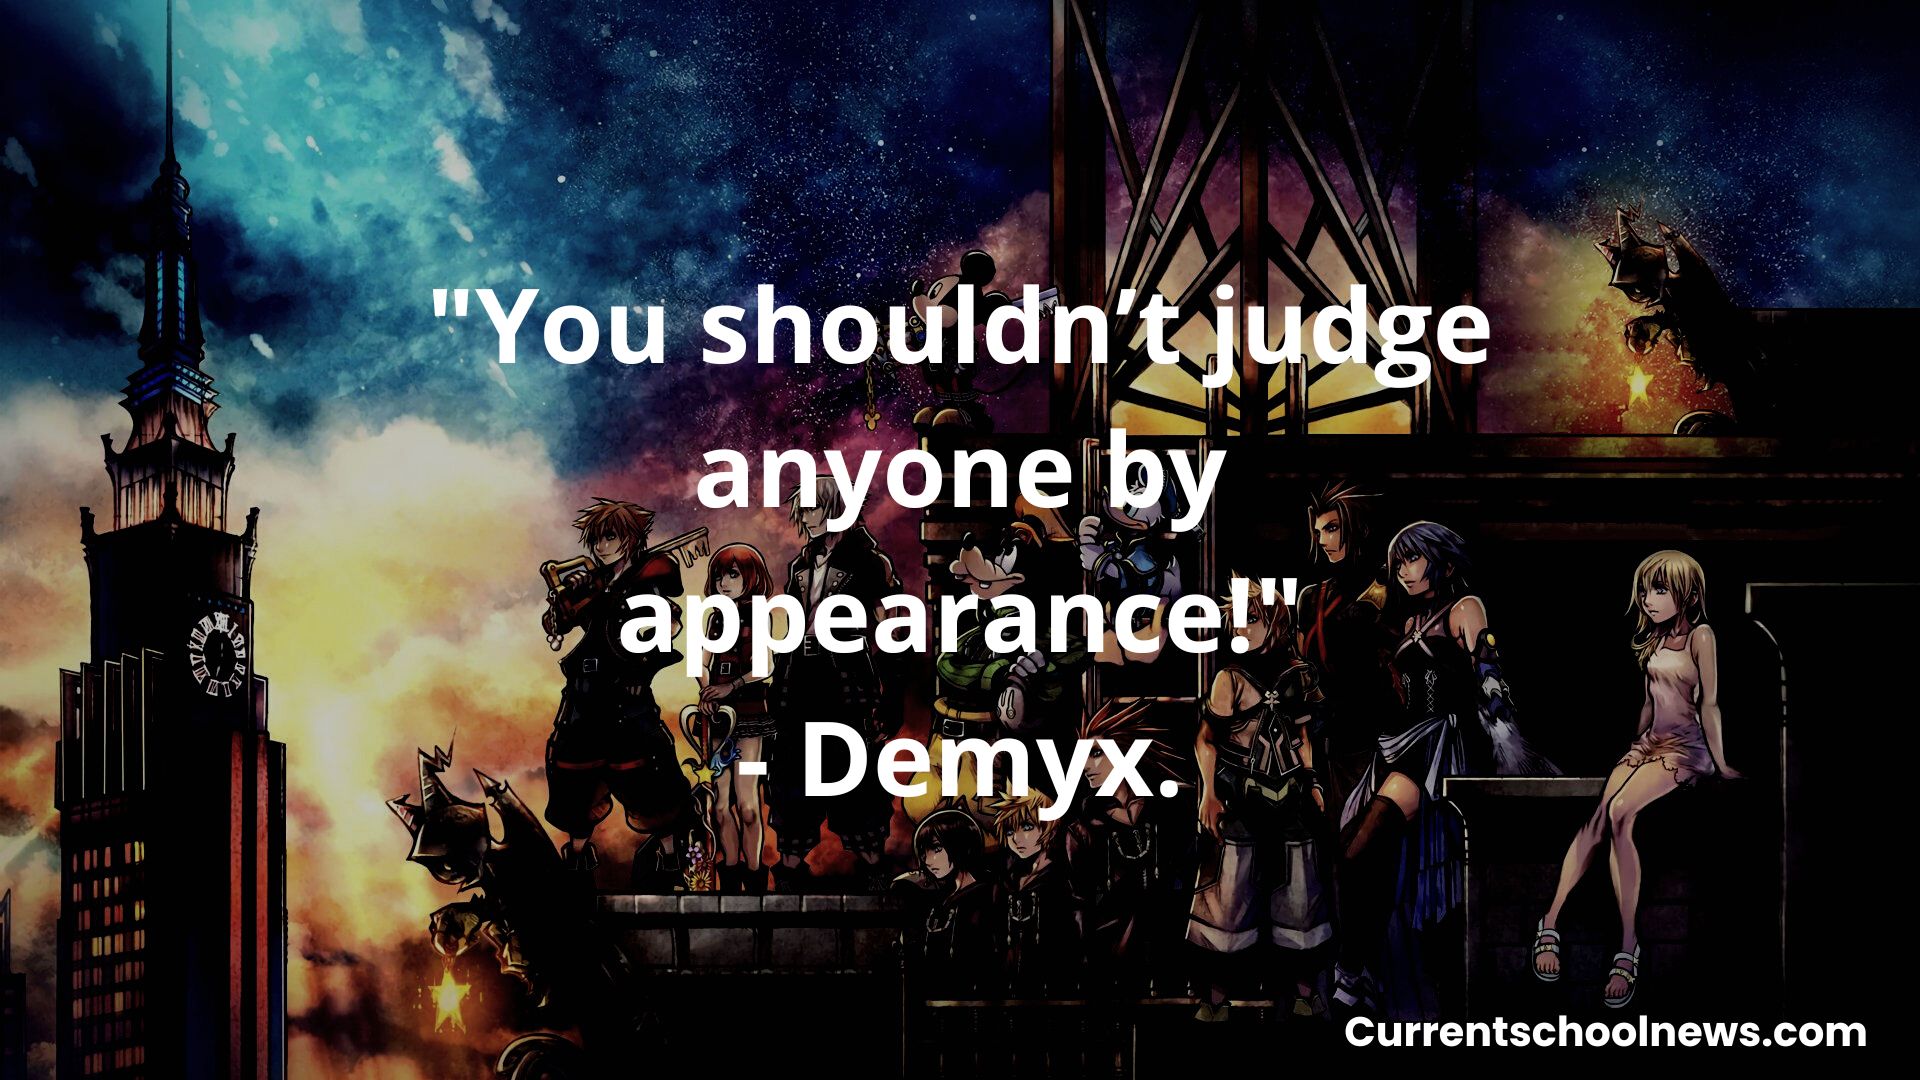 kingdom hearts quotes darkness